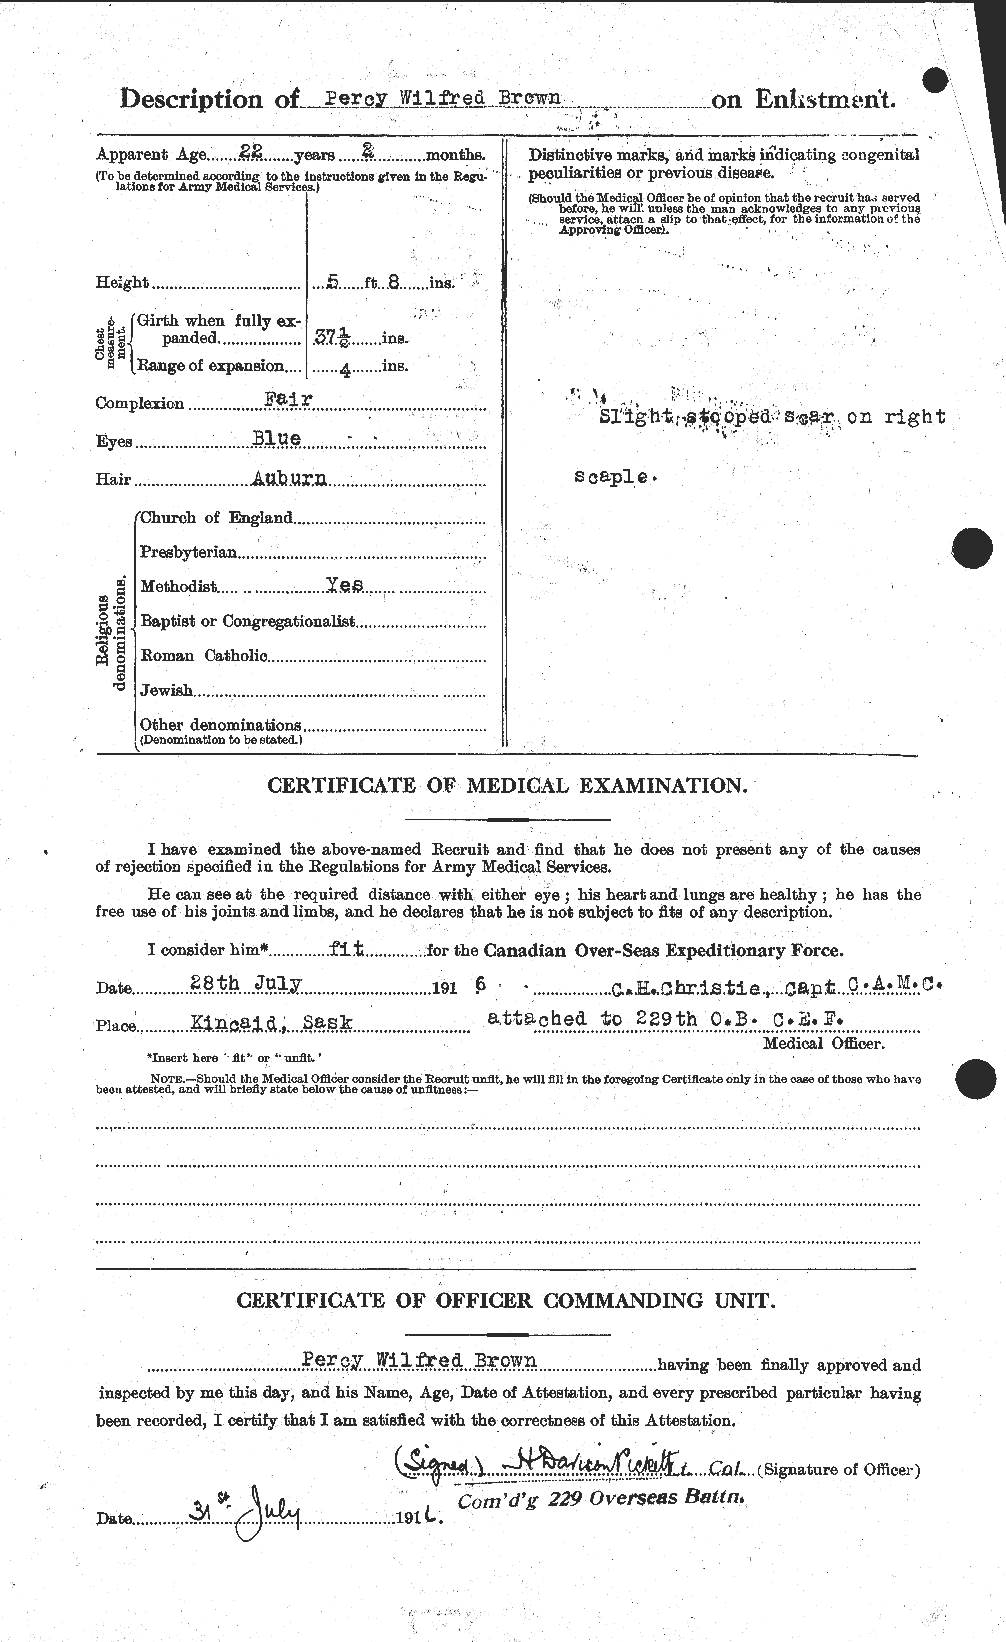 Personnel Records of the First World War - CEF 267182b